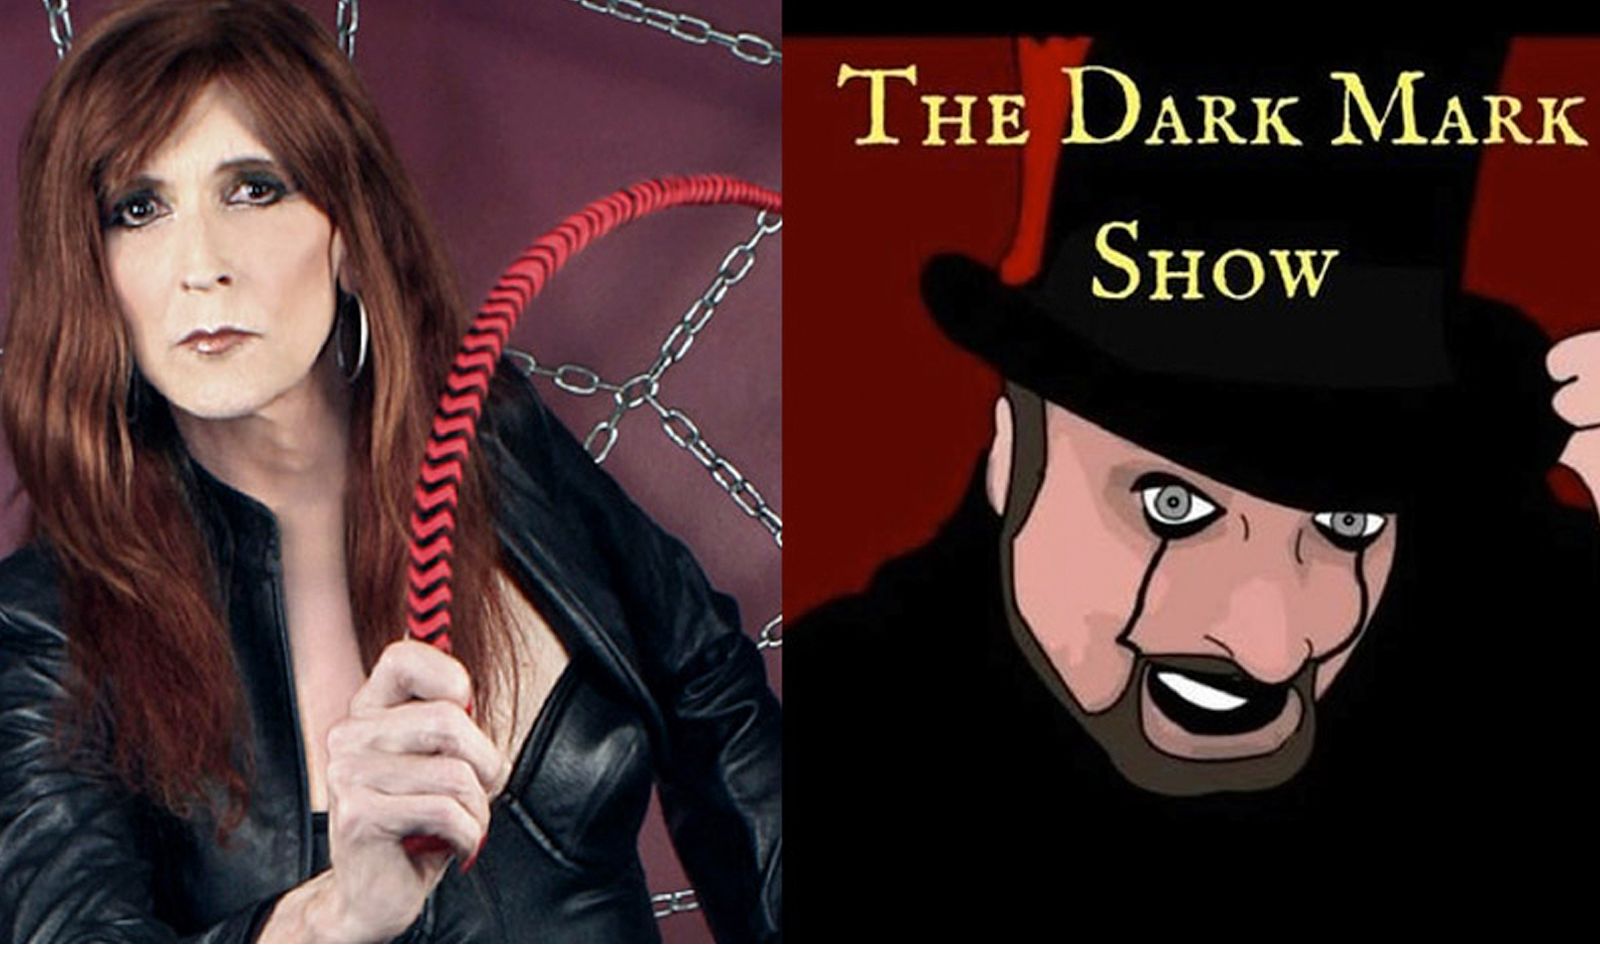 Mistress Cyan, Dommes of Sanctuary LAX Guests on ‘Dark Mark Show'